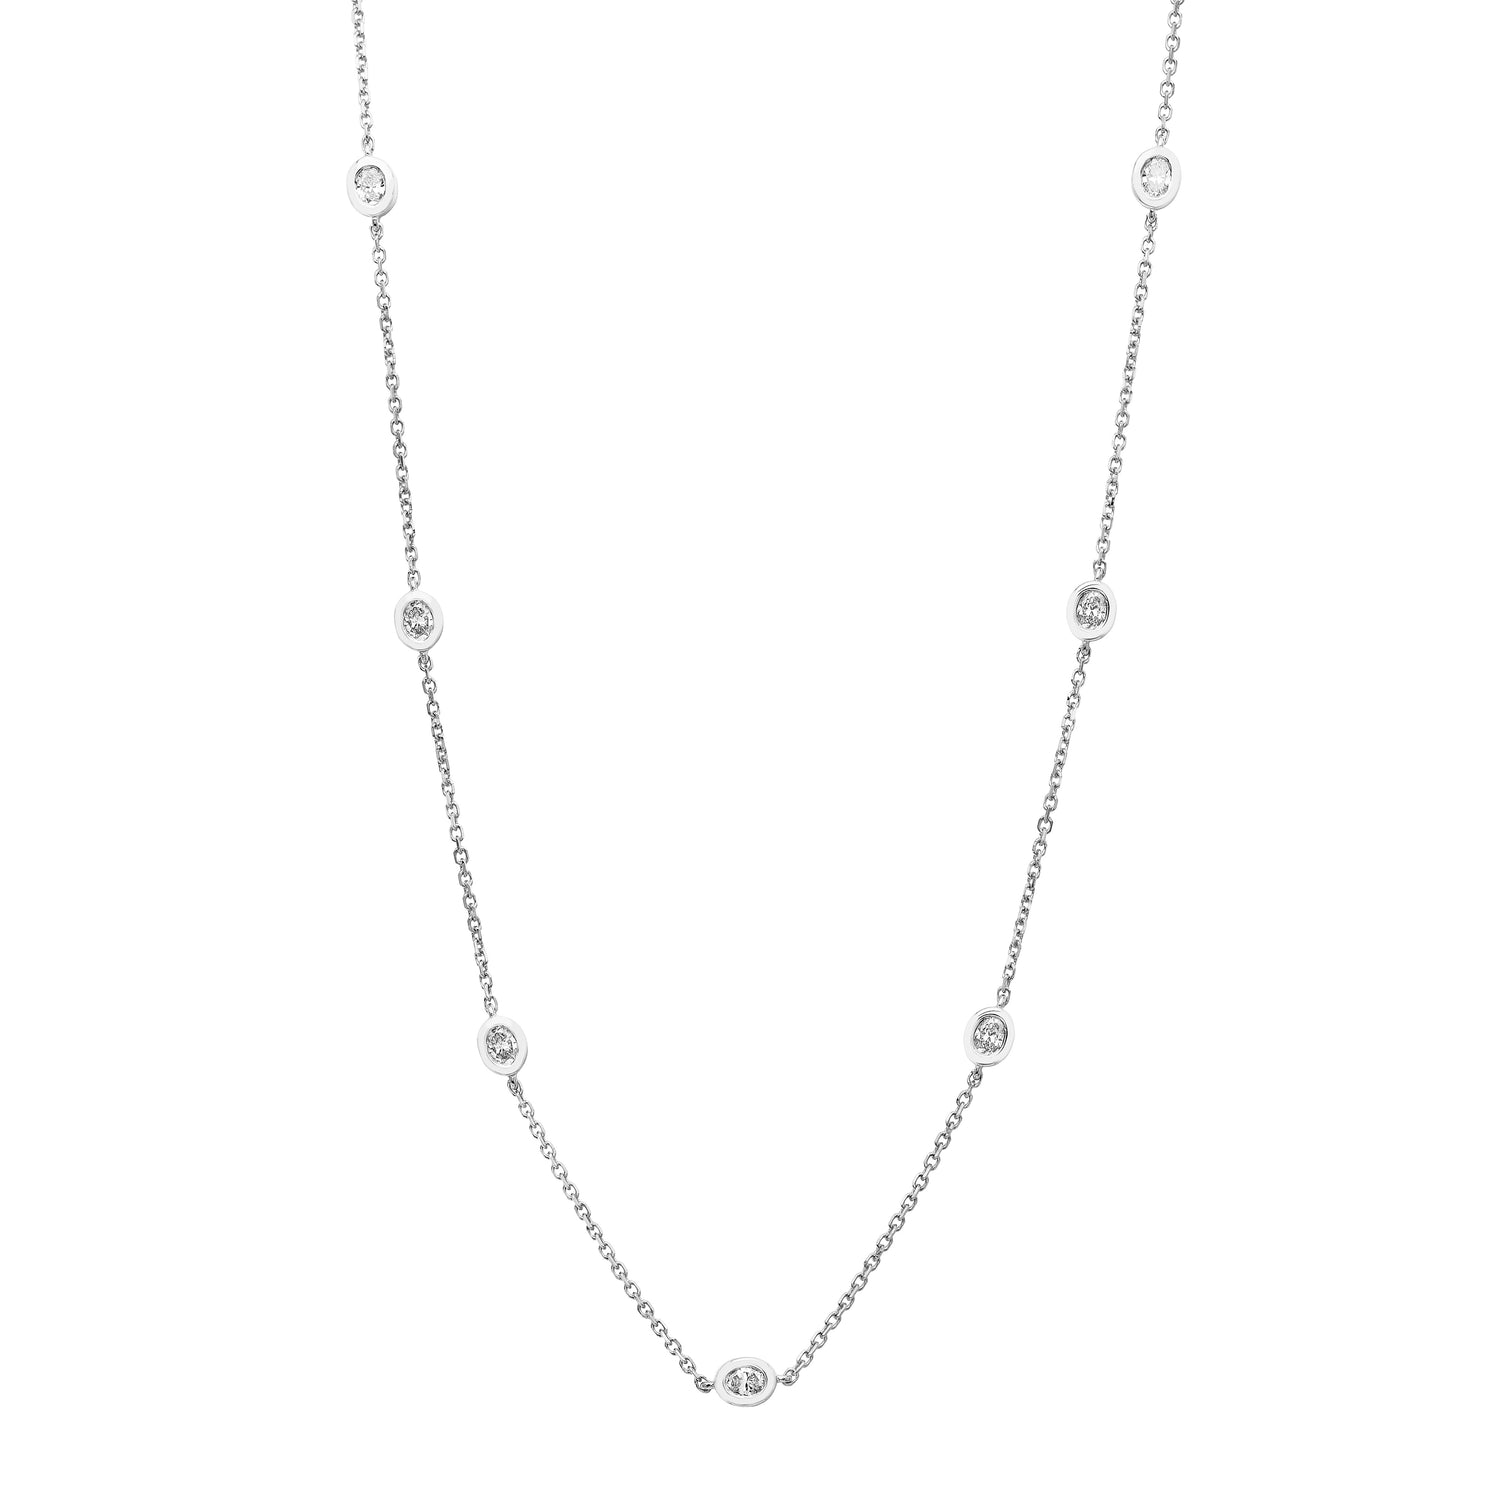 Oval diamond by the yard necklace